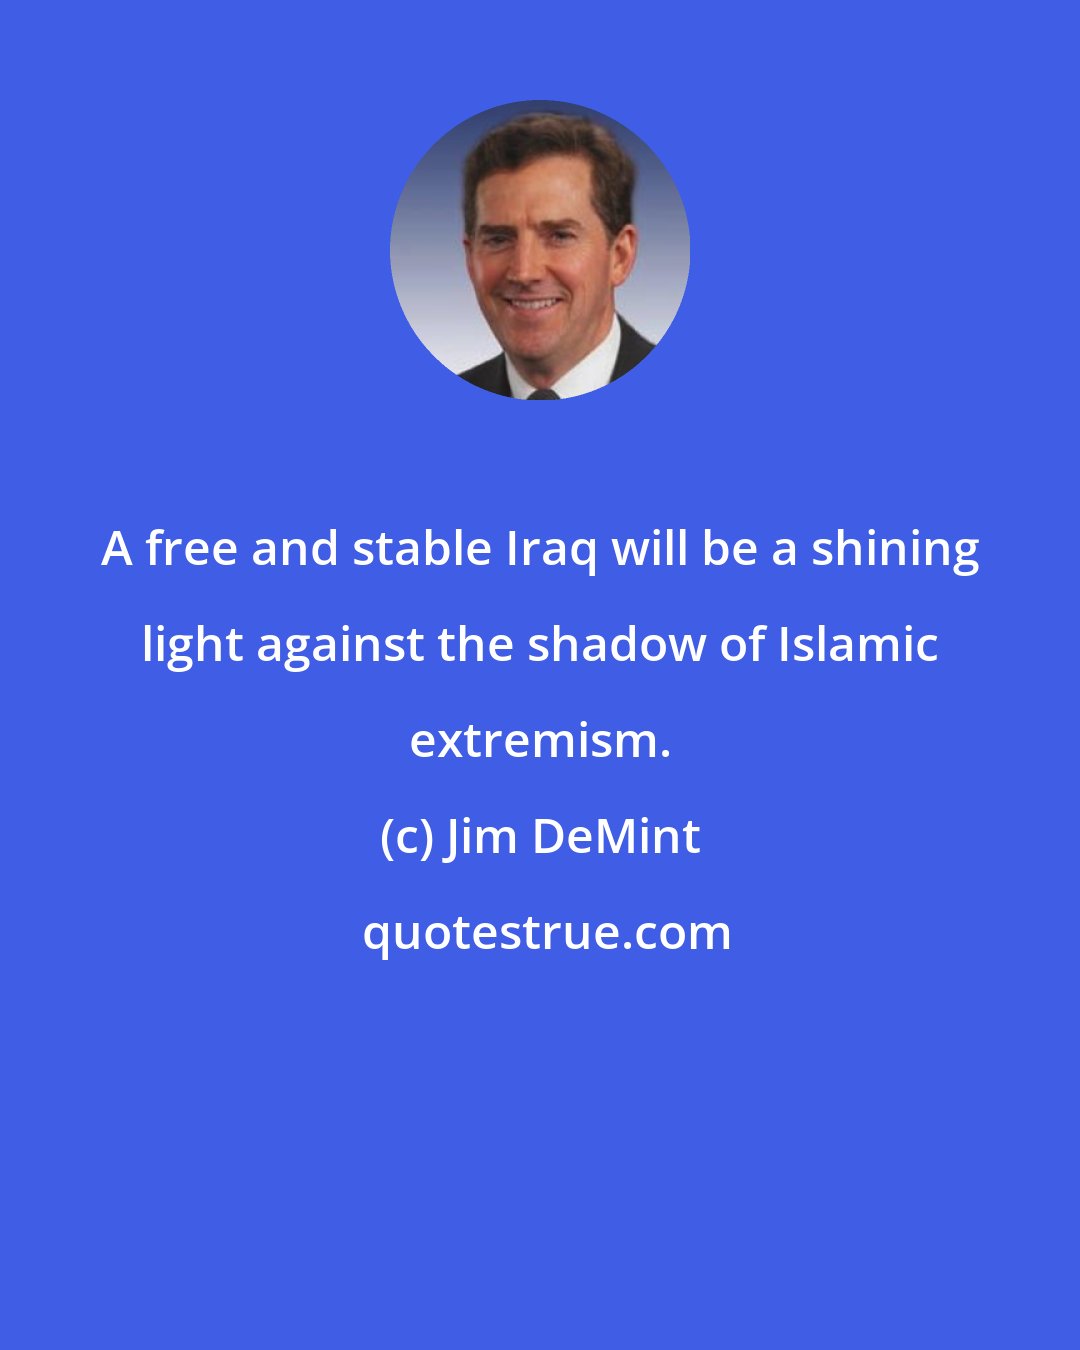 Jim DeMint: A free and stable Iraq will be a shining light against the shadow of Islamic extremism.